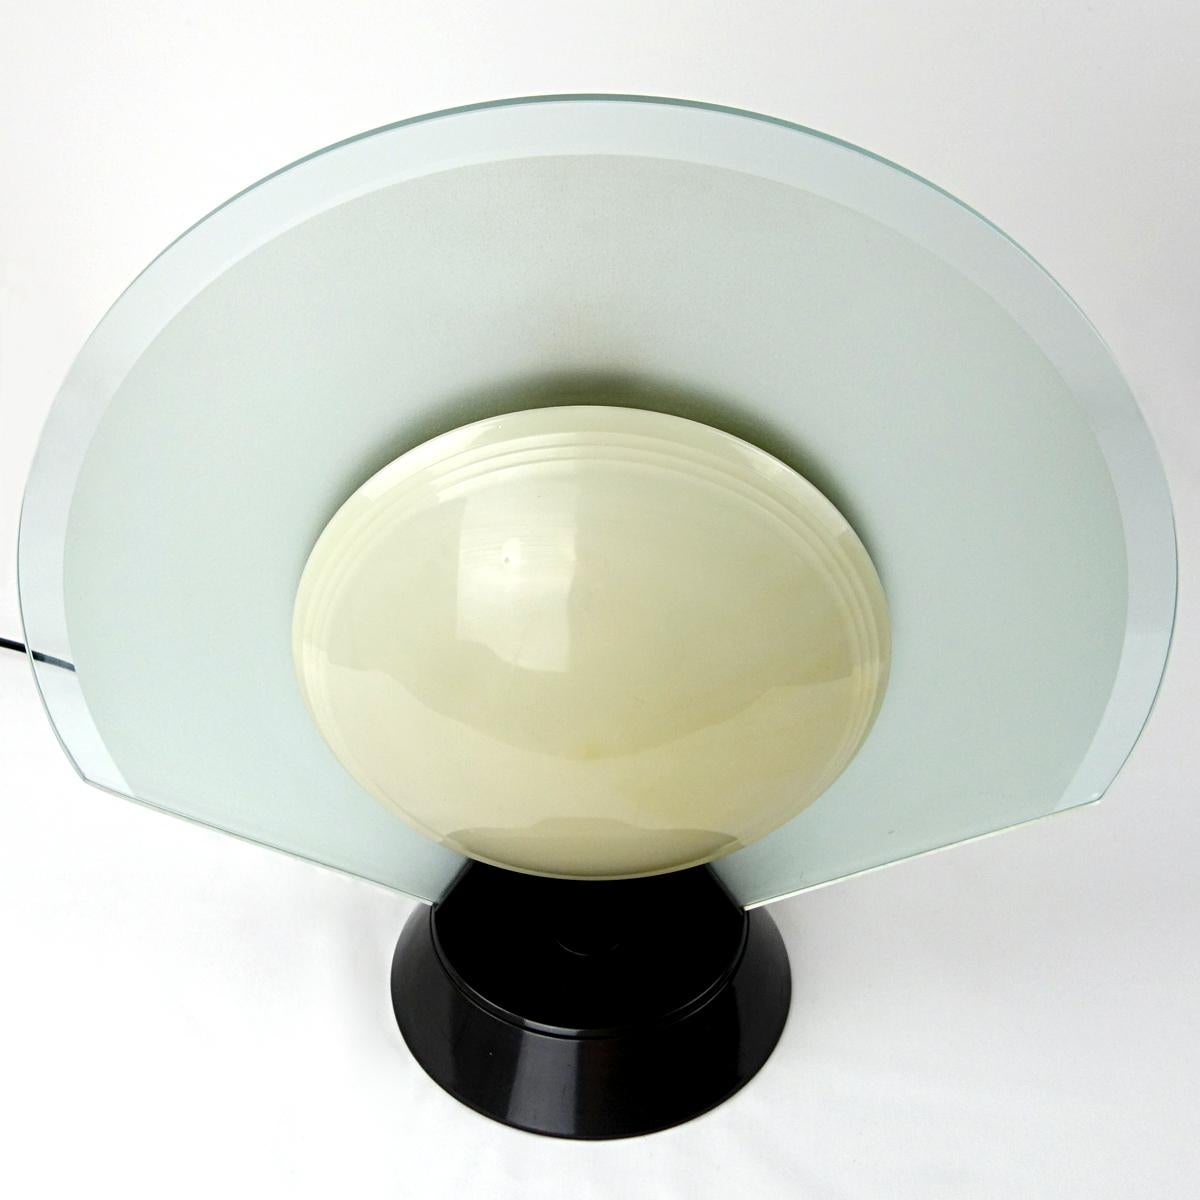 Table lamp Tikkal was designed by Pier Giuseppe Ramella for Arteluce circa 1980.
The fan shaped frosted glass shade may rotate on its base showing either an off-white convex plastic lens on one side or a soft gray lens on the other.